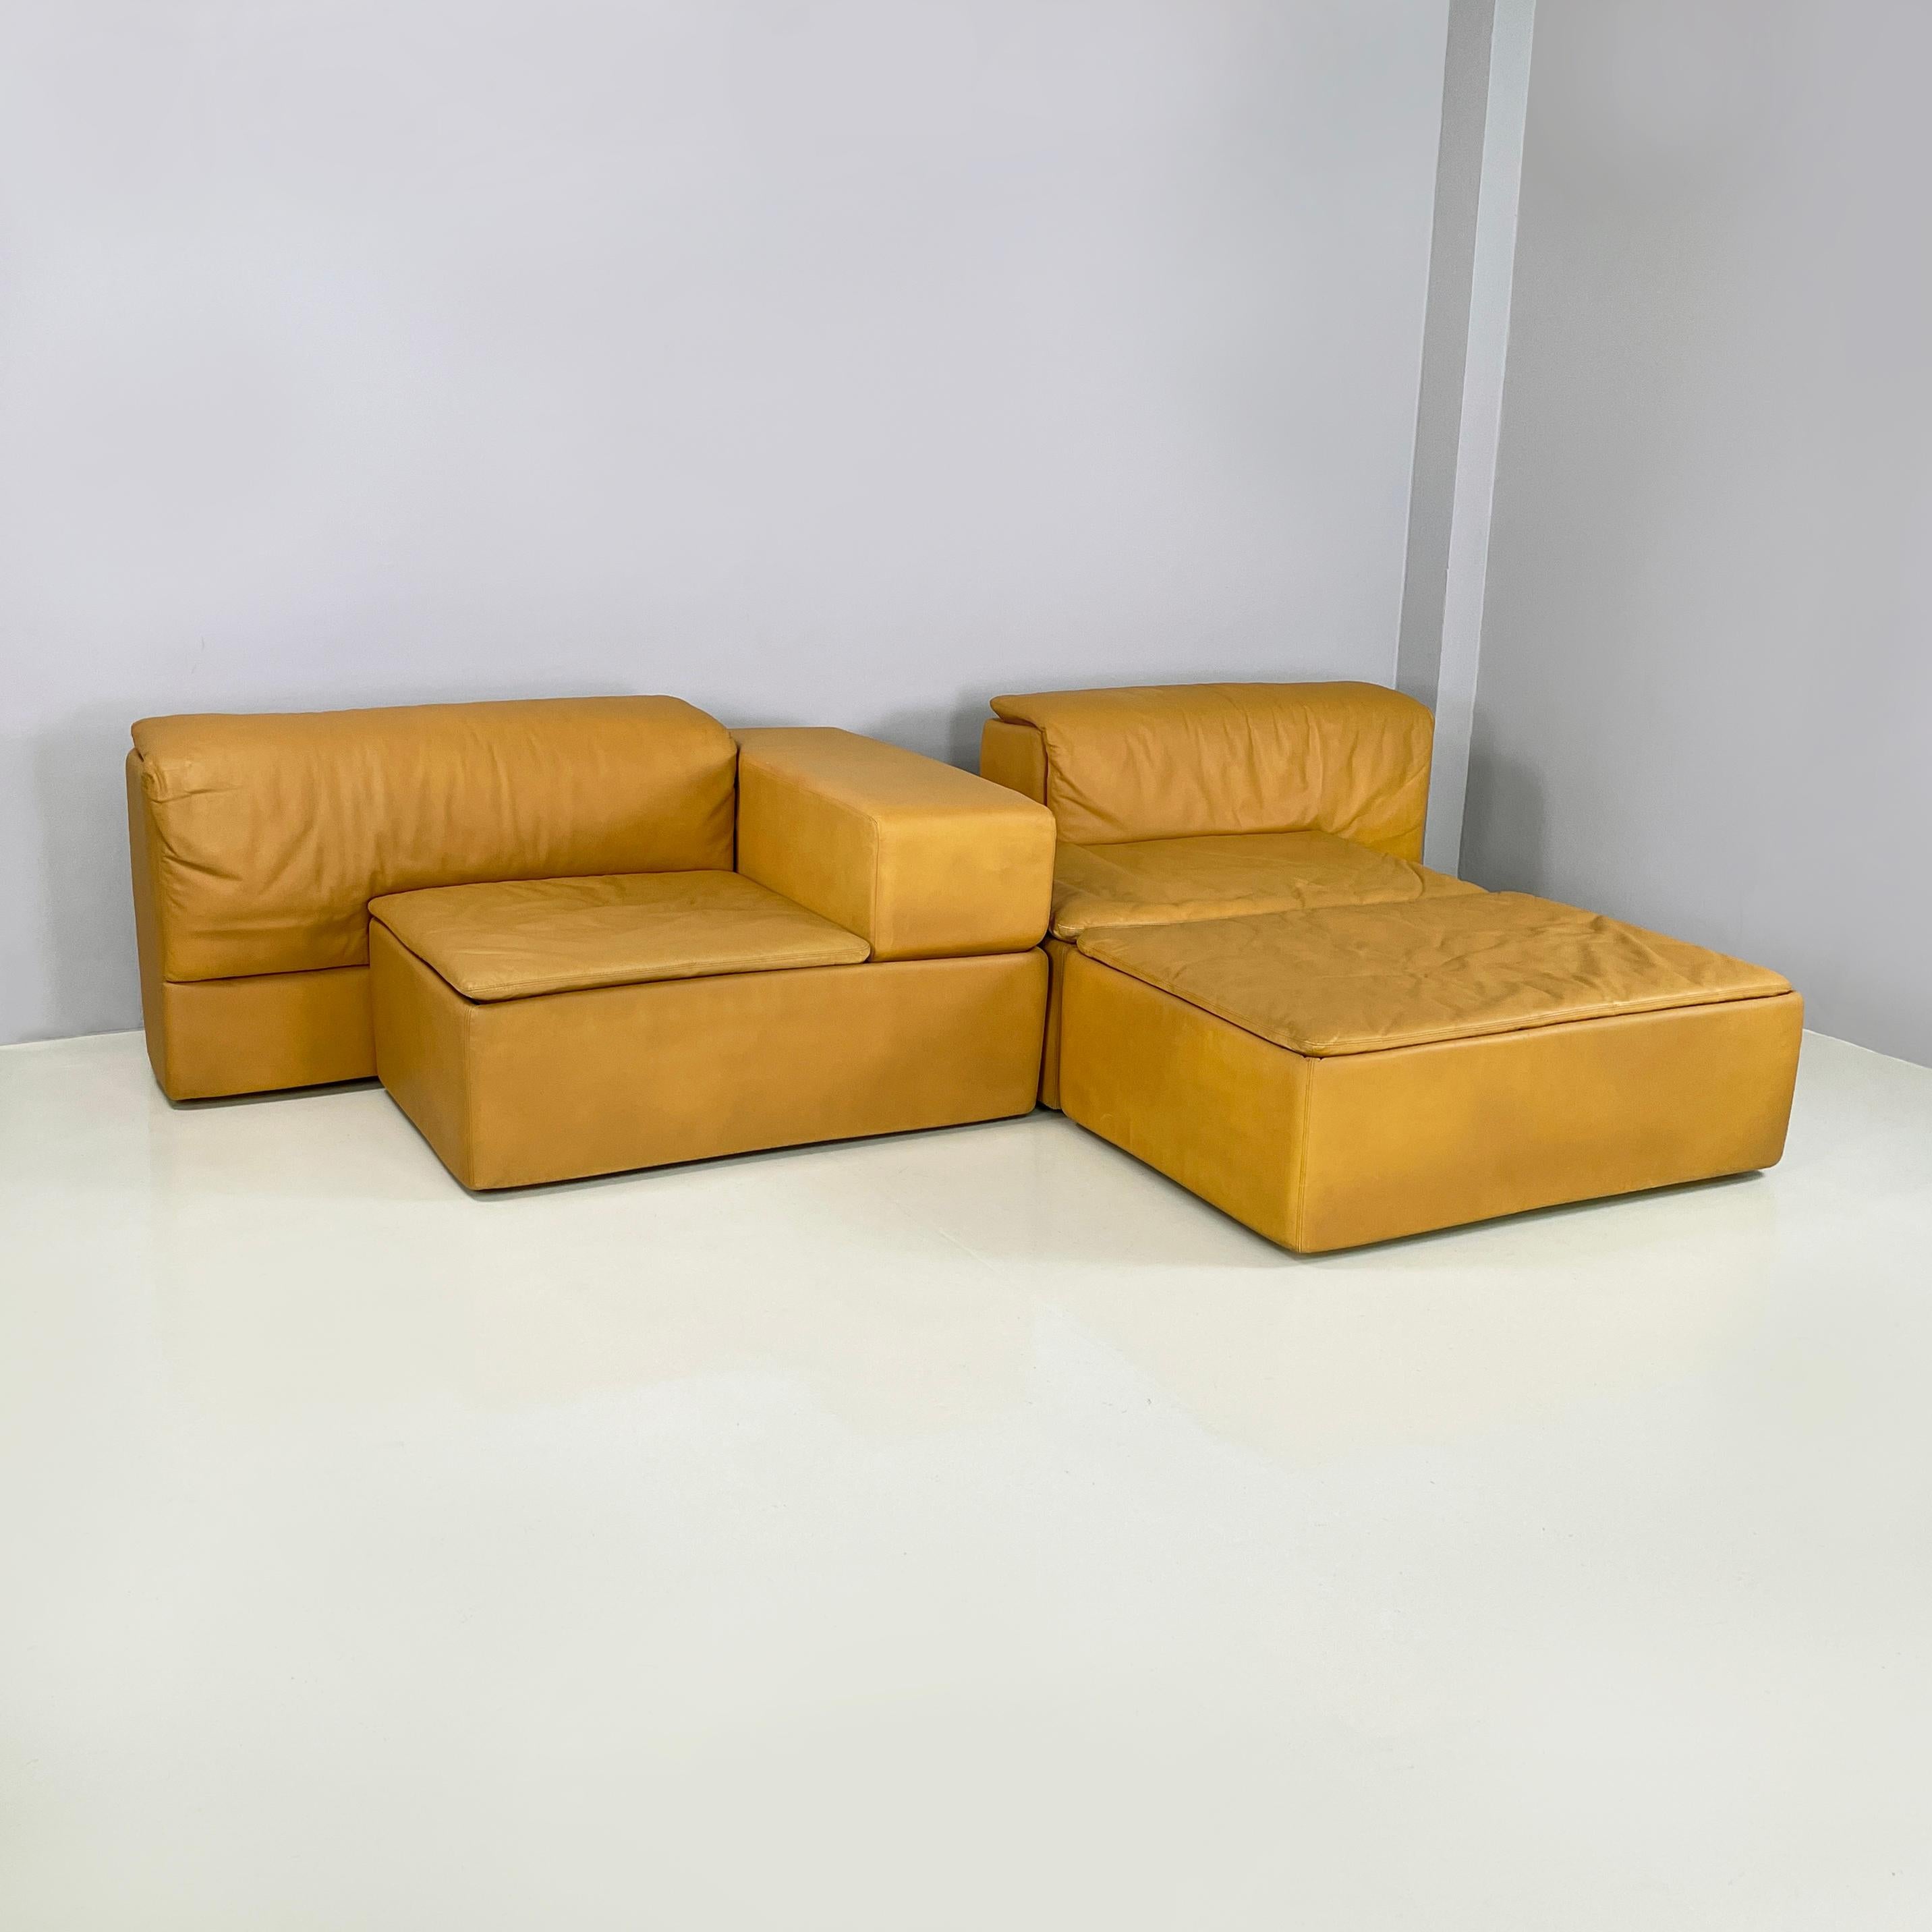 Late 20th Century Italian modern Brown leather modular sofa Paione by Salocchi for Sormani, 1970s For Sale